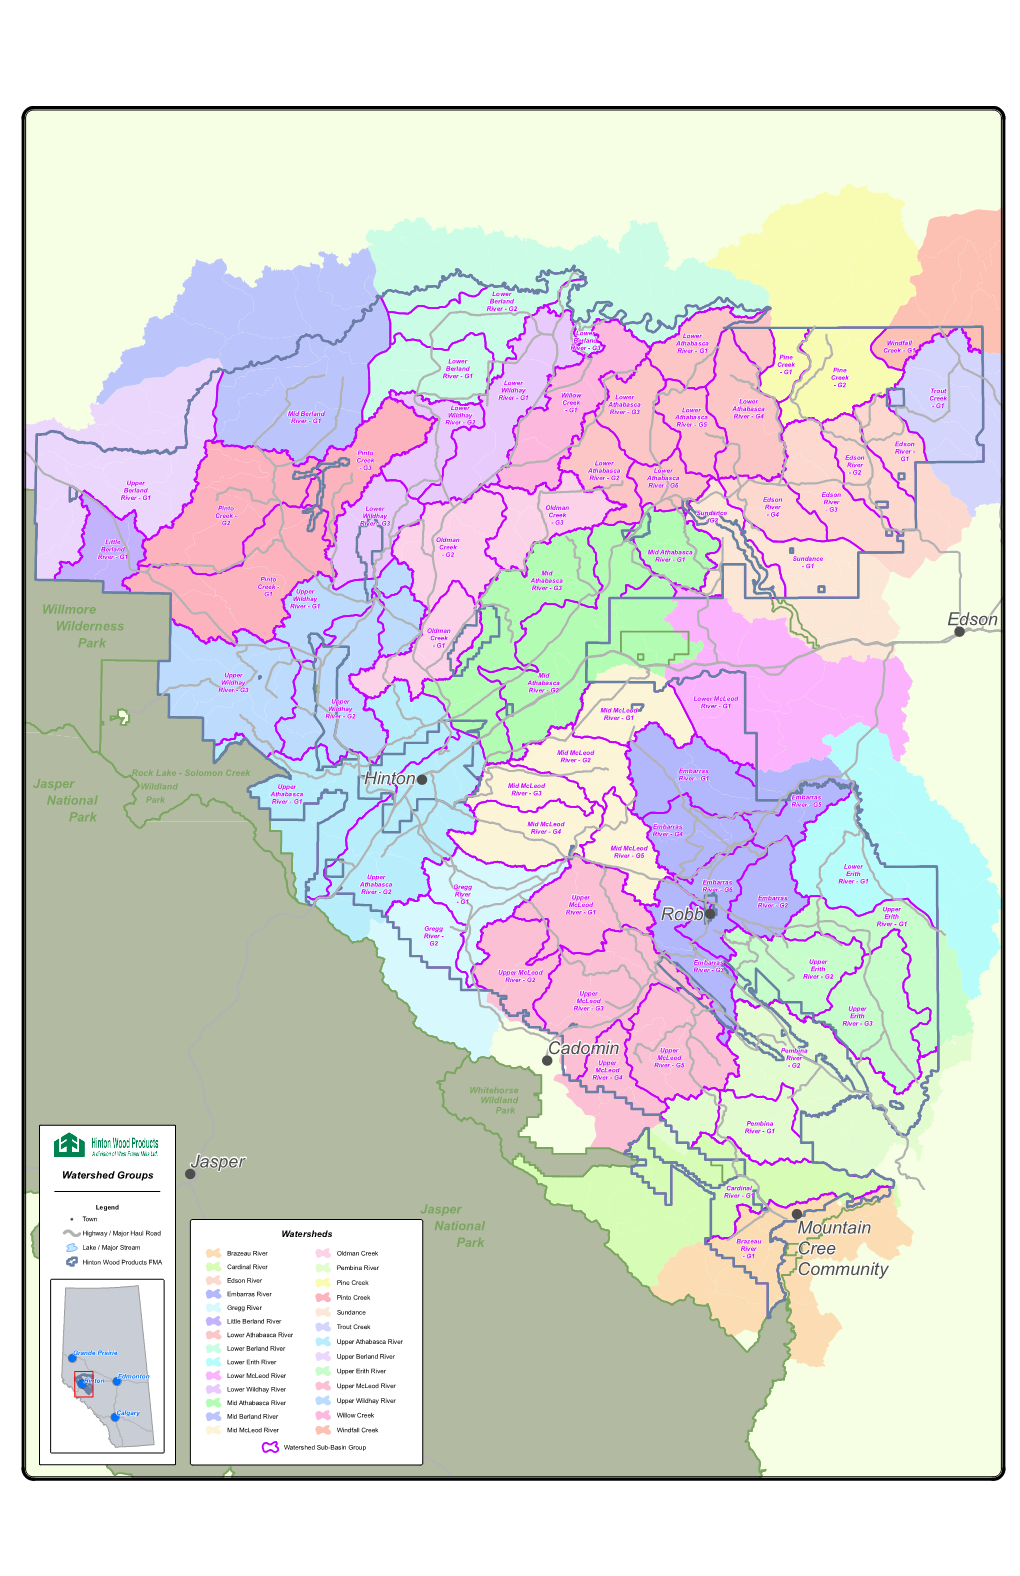 Volume II Section 3 Watershed Groups